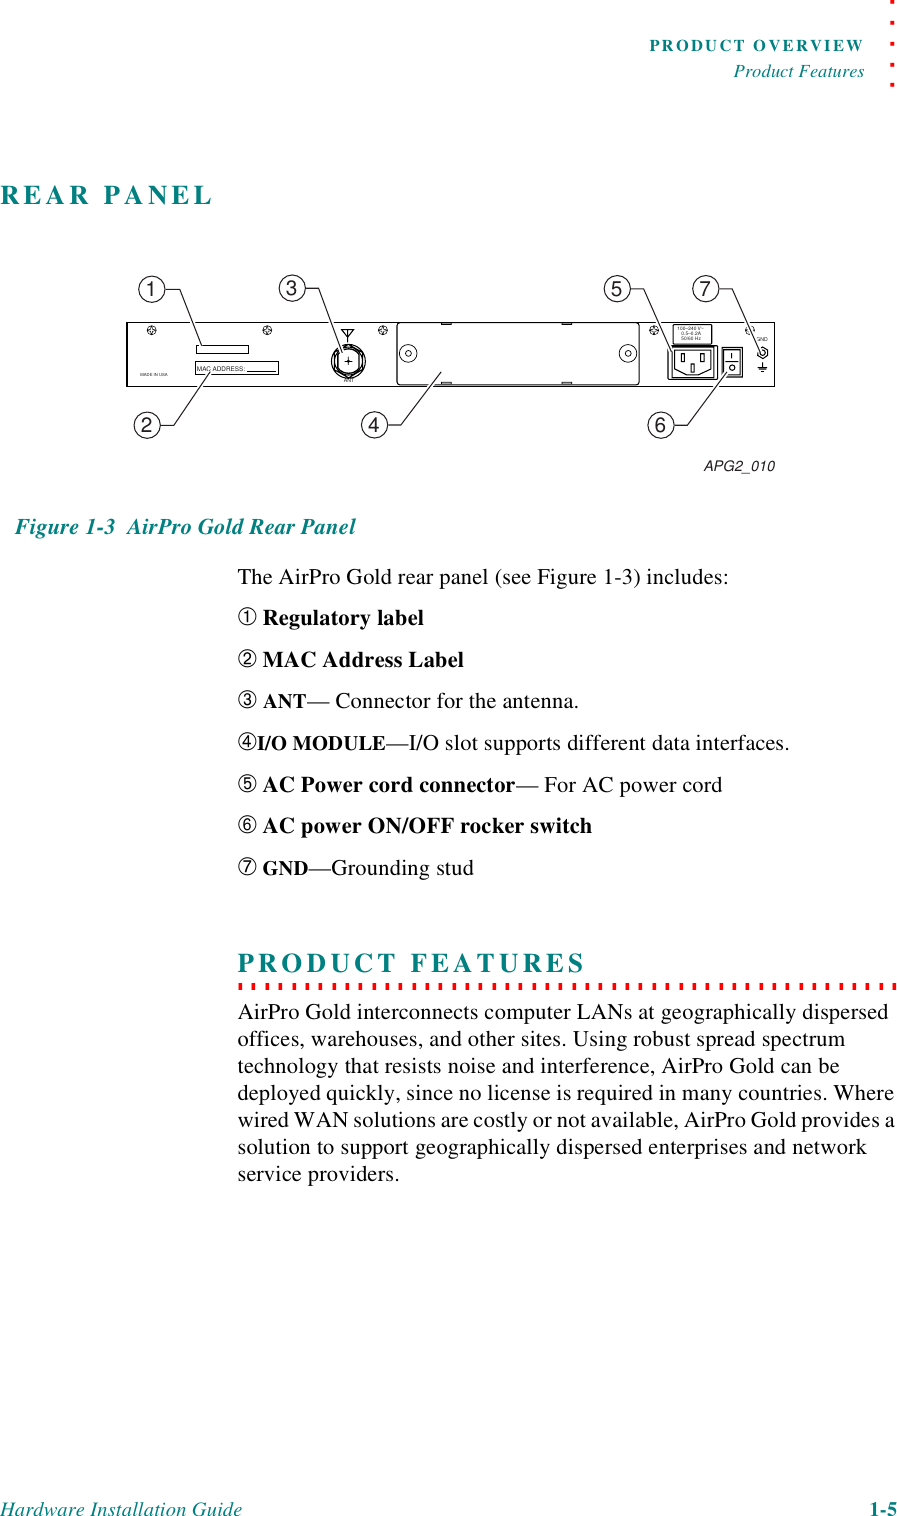 . . . . .PRODUCT OVERVIEWProduct FeaturesHardware Installation Guide 1-5REAR PANELFigure 1-3  AirPro Gold Rear PanelThe AirPro Gold rear panel (see Figure 1-3) includes:➀Regulatory label➁MAC Address Label➂ANT— Connector for the antenna.➃I/O MODULE—I/O slot supports different data interfaces.➄AC Power cord connector— For AC power cord➅AC power ON/OFF rocker switch➆GND—Grounding stud. . . . . . . . . . . . . . . . . . . . . . . . . . . . . . . . . . . . . . . . . . . . . . . . . . PRODUCT FEATURESAirPro Gold interconnects computer LANs at geographically dispersed offices, warehouses, and other sites. Using robust spread spectrum technology that resists noise and interference, AirPro Gold can be deployed quickly, since no license is required in many countries. Where wired WAN solutions are costly or not available, AirPro Gold provides a solution to support geographically dispersed enterprises and network service providers.MADE IN USA MAC ADDRESS:ANTGND100–240 V~0.5–0.2A       50/60 Hz  APG2_010123465 7